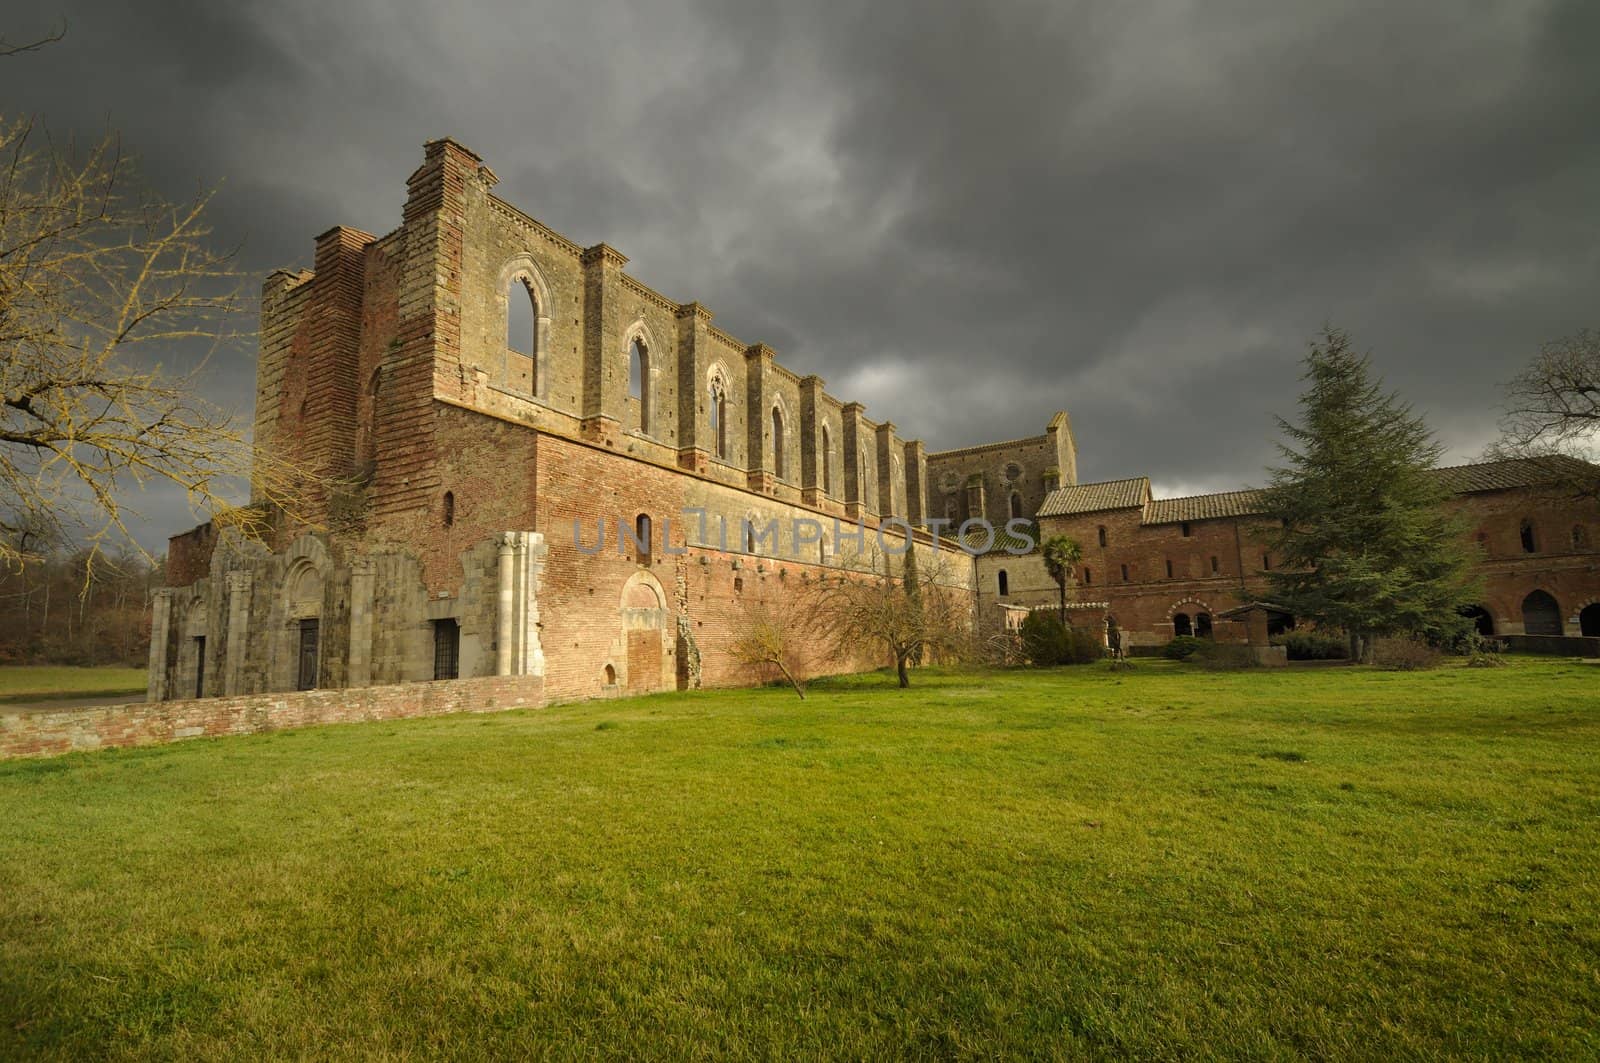 The ruins of San Galgano's Abbey in Italy